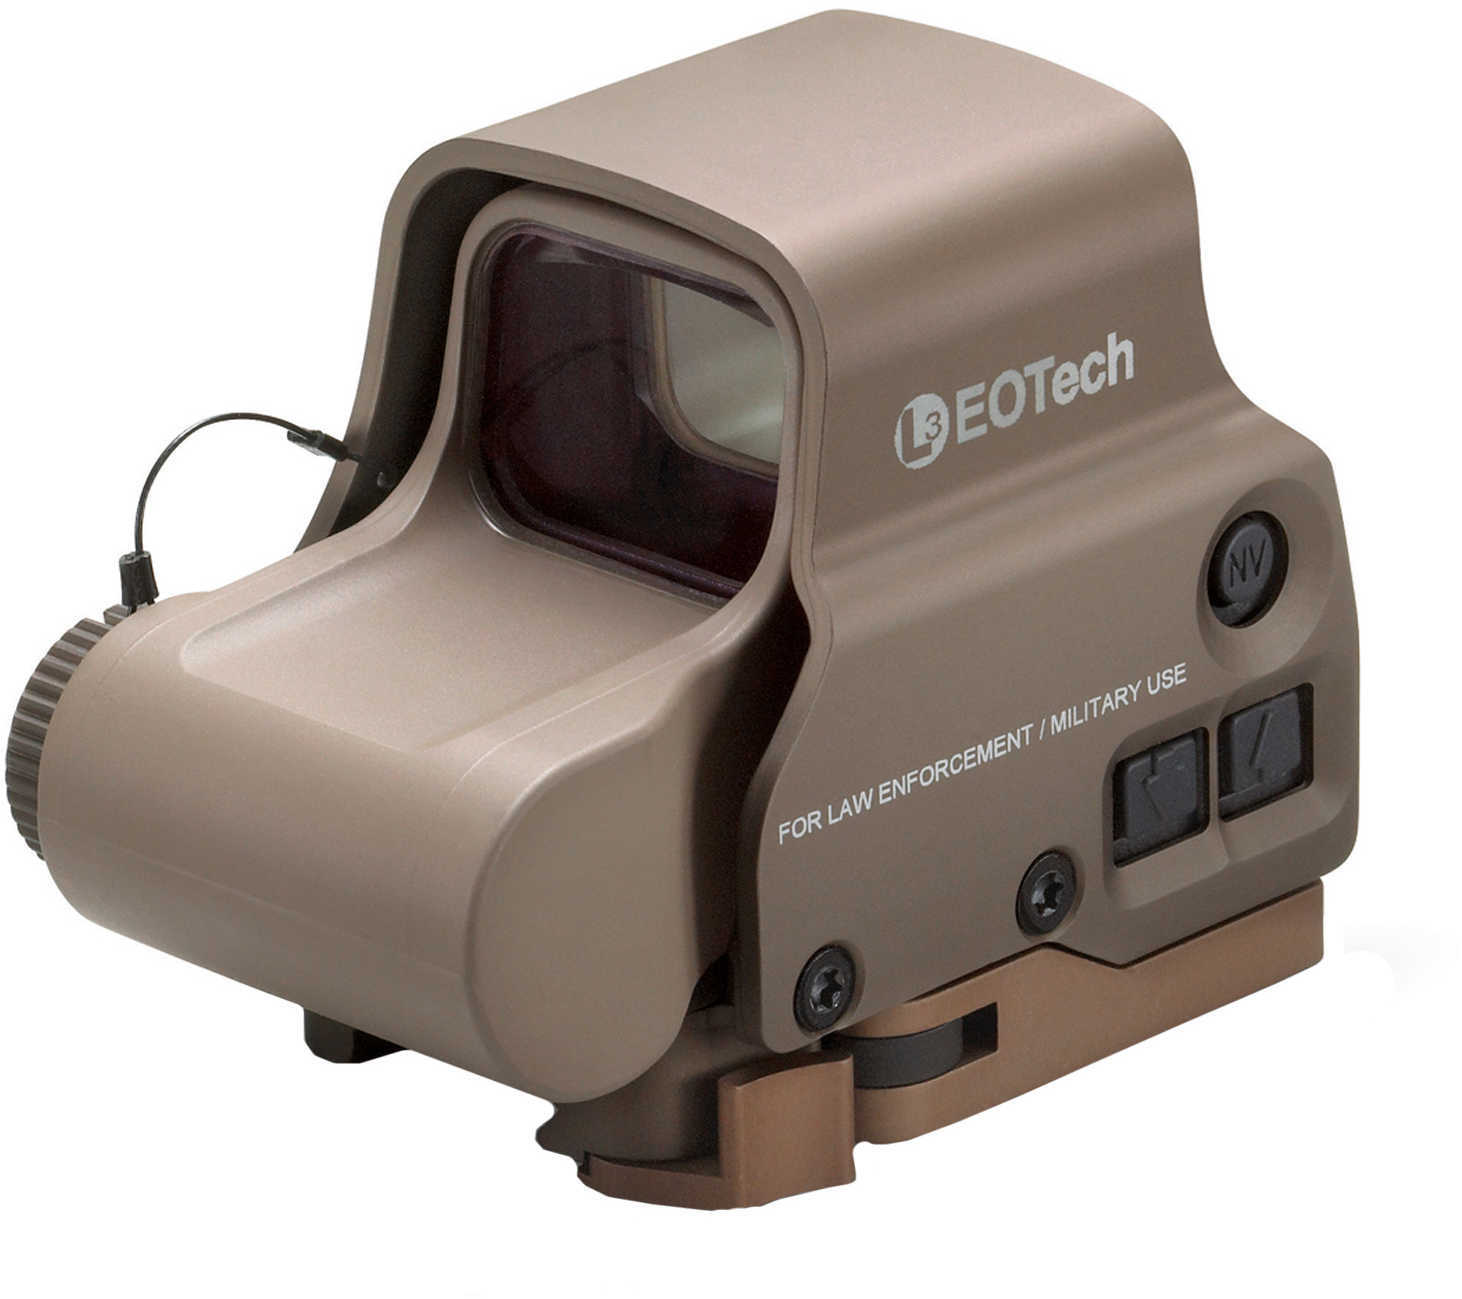 Eotech EXPS30T Holographic Weapon Sight 1x 68 MOA Ring/1 Red Dot Tan CR123A Lithium